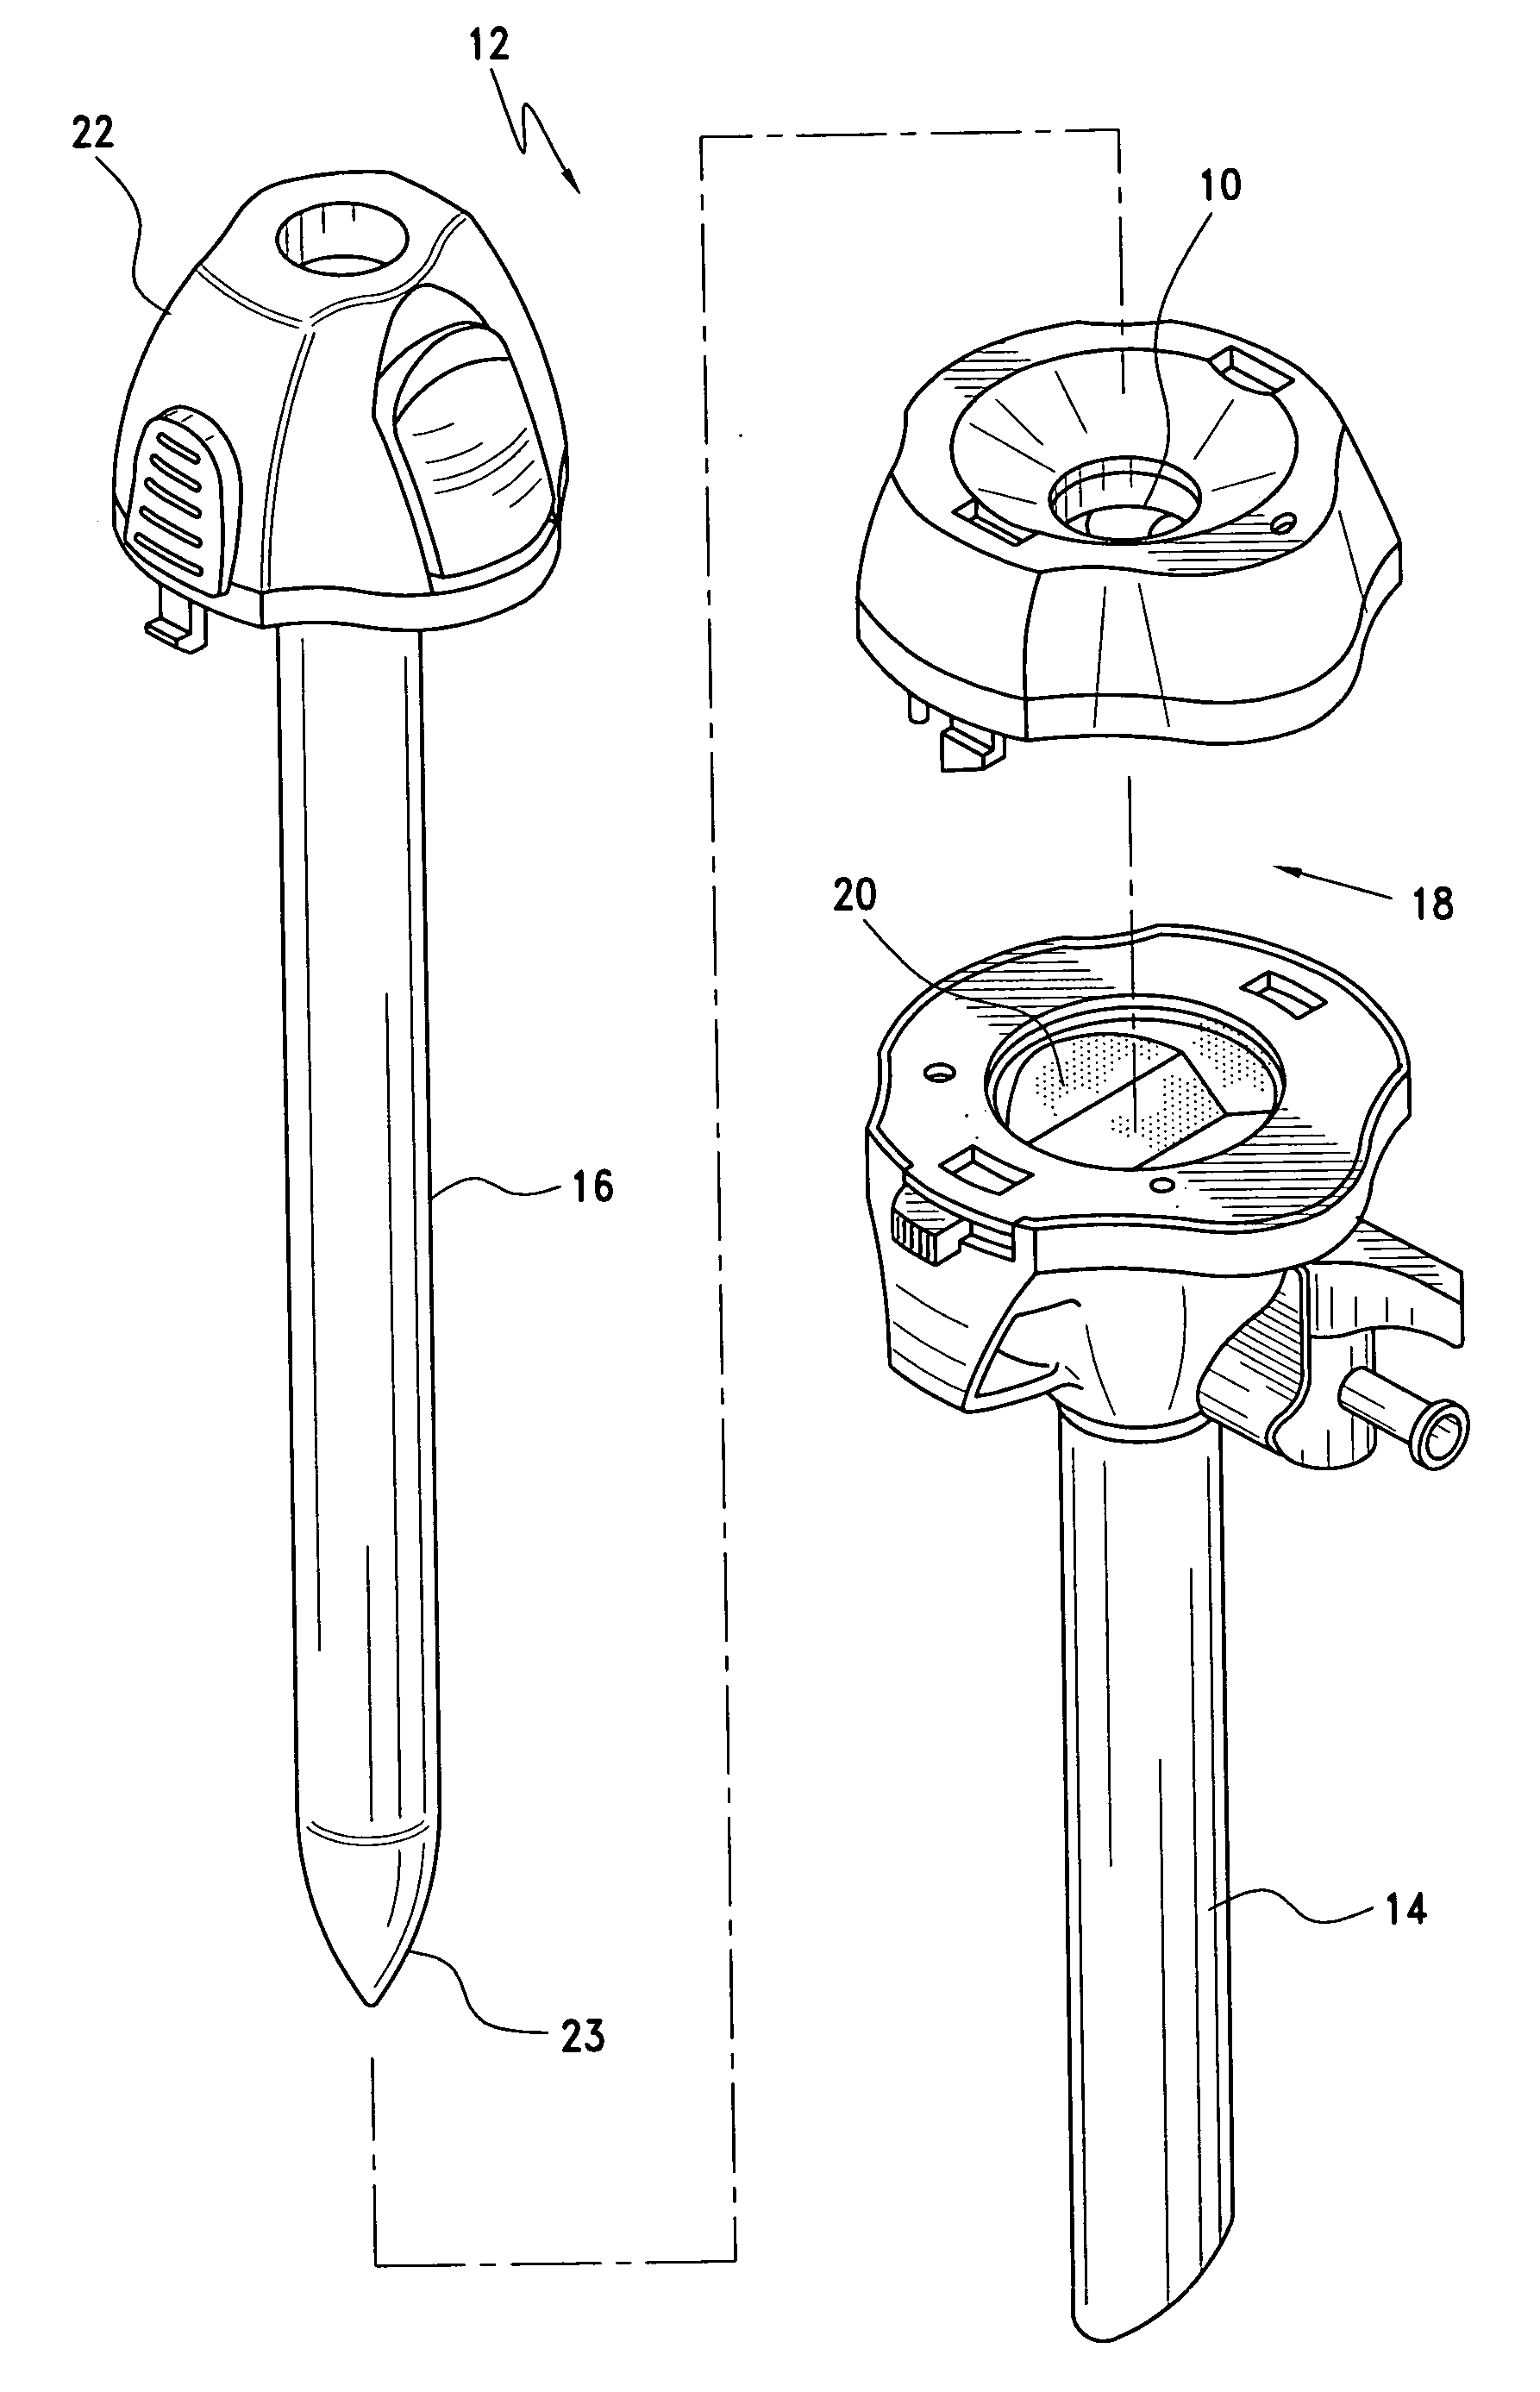 Trocar seal assembly